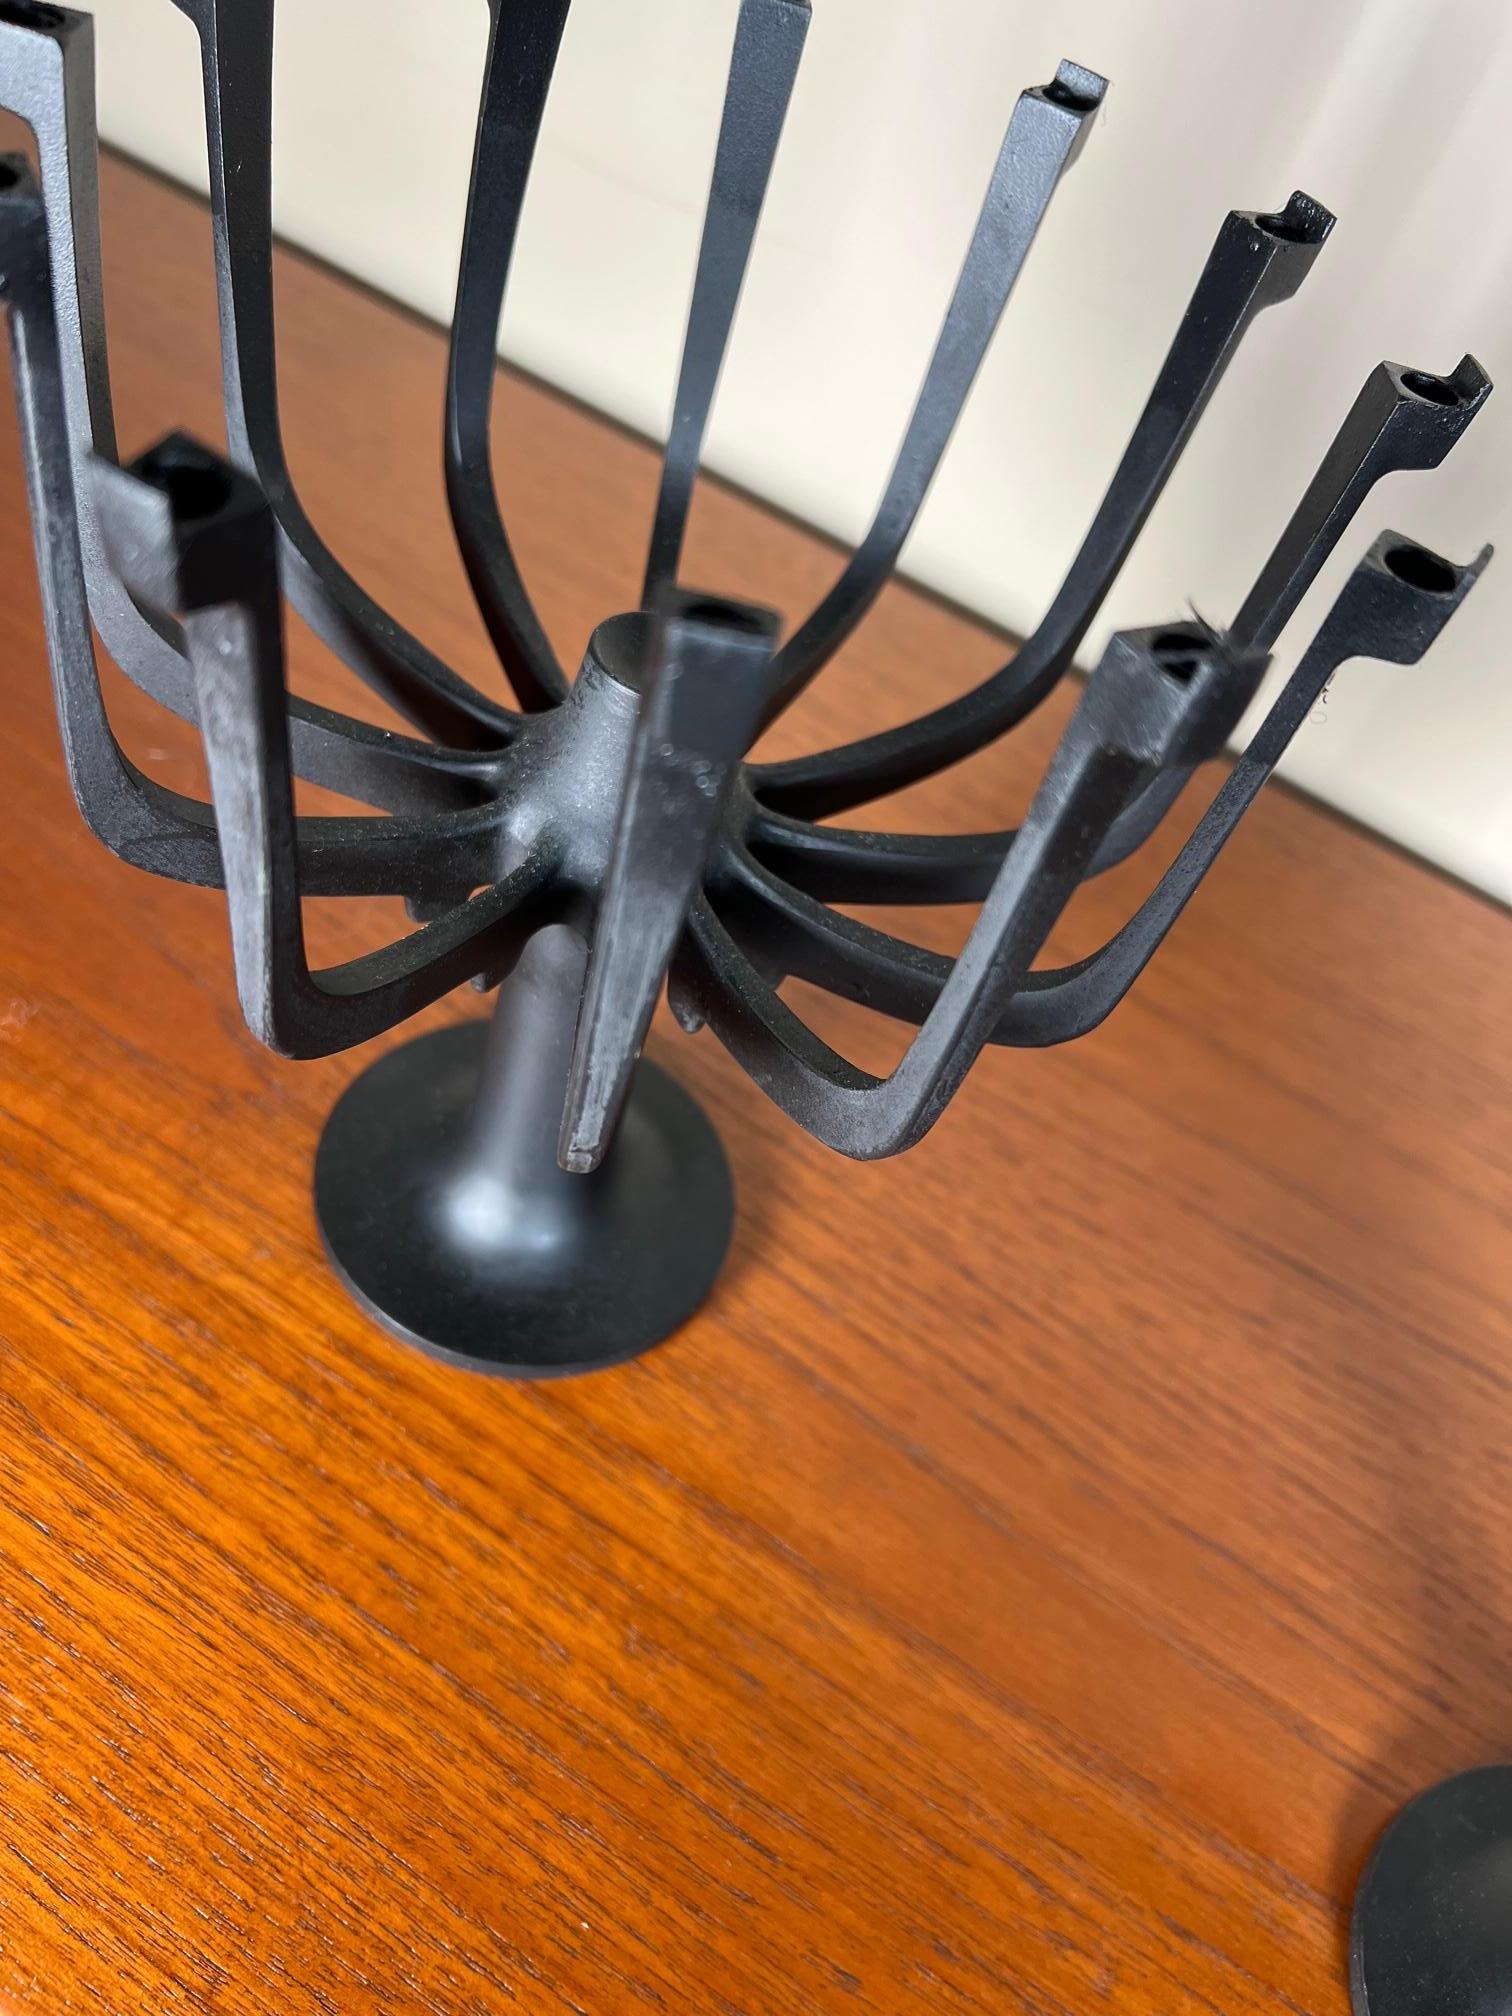 Pair of Mid-Century Modern Danish Cast Iron Candle Holders Candelabras Dansk In Good Condition For Sale In Atlanta, GA